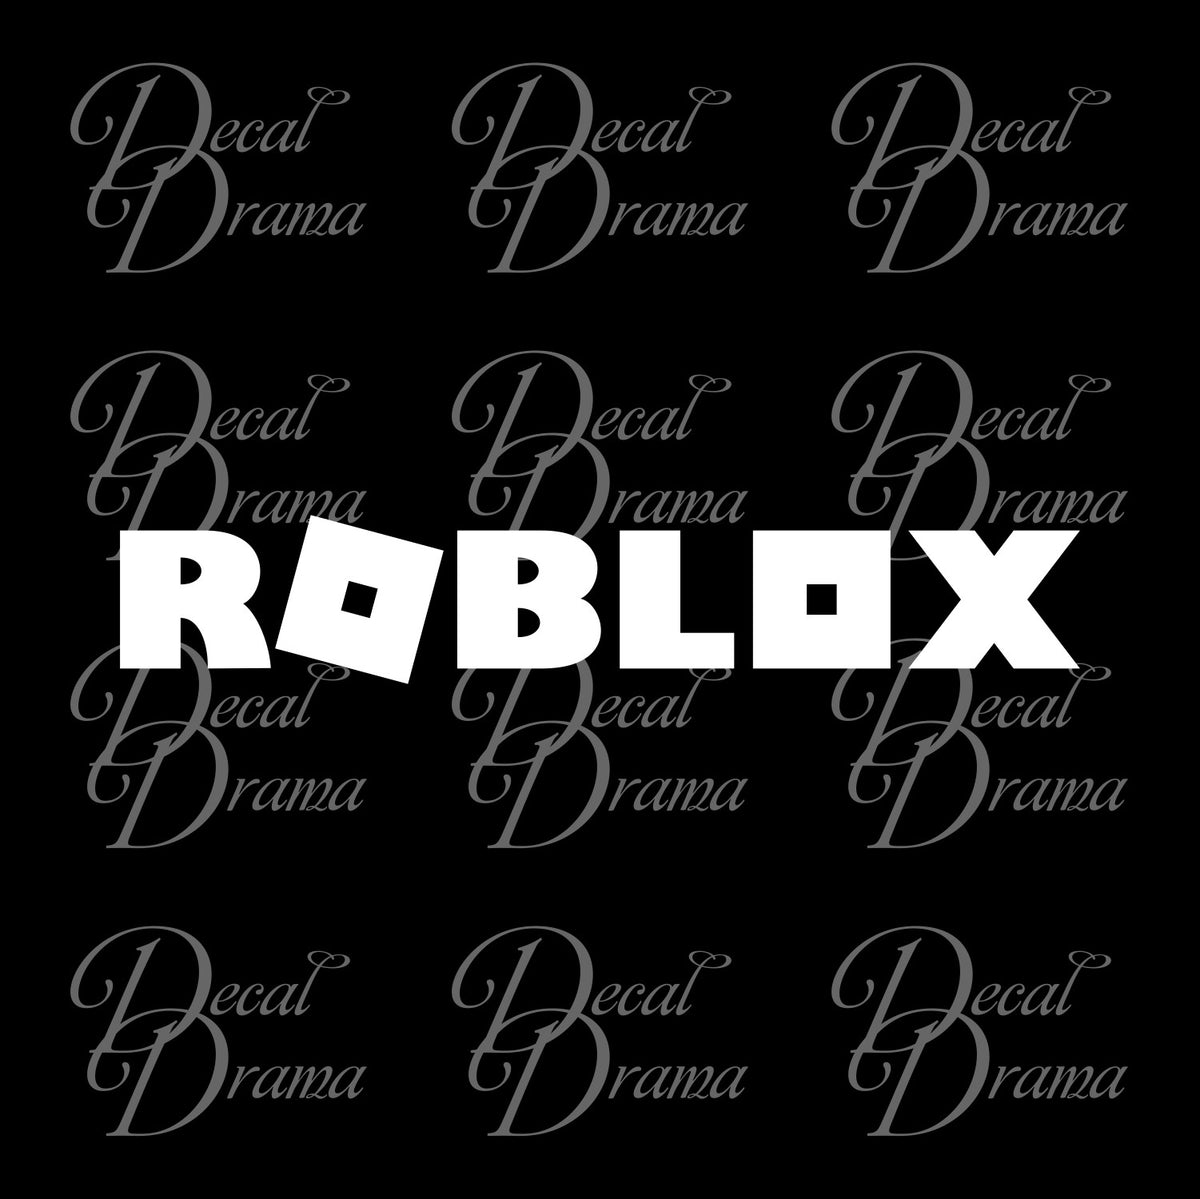 Roblox Decal